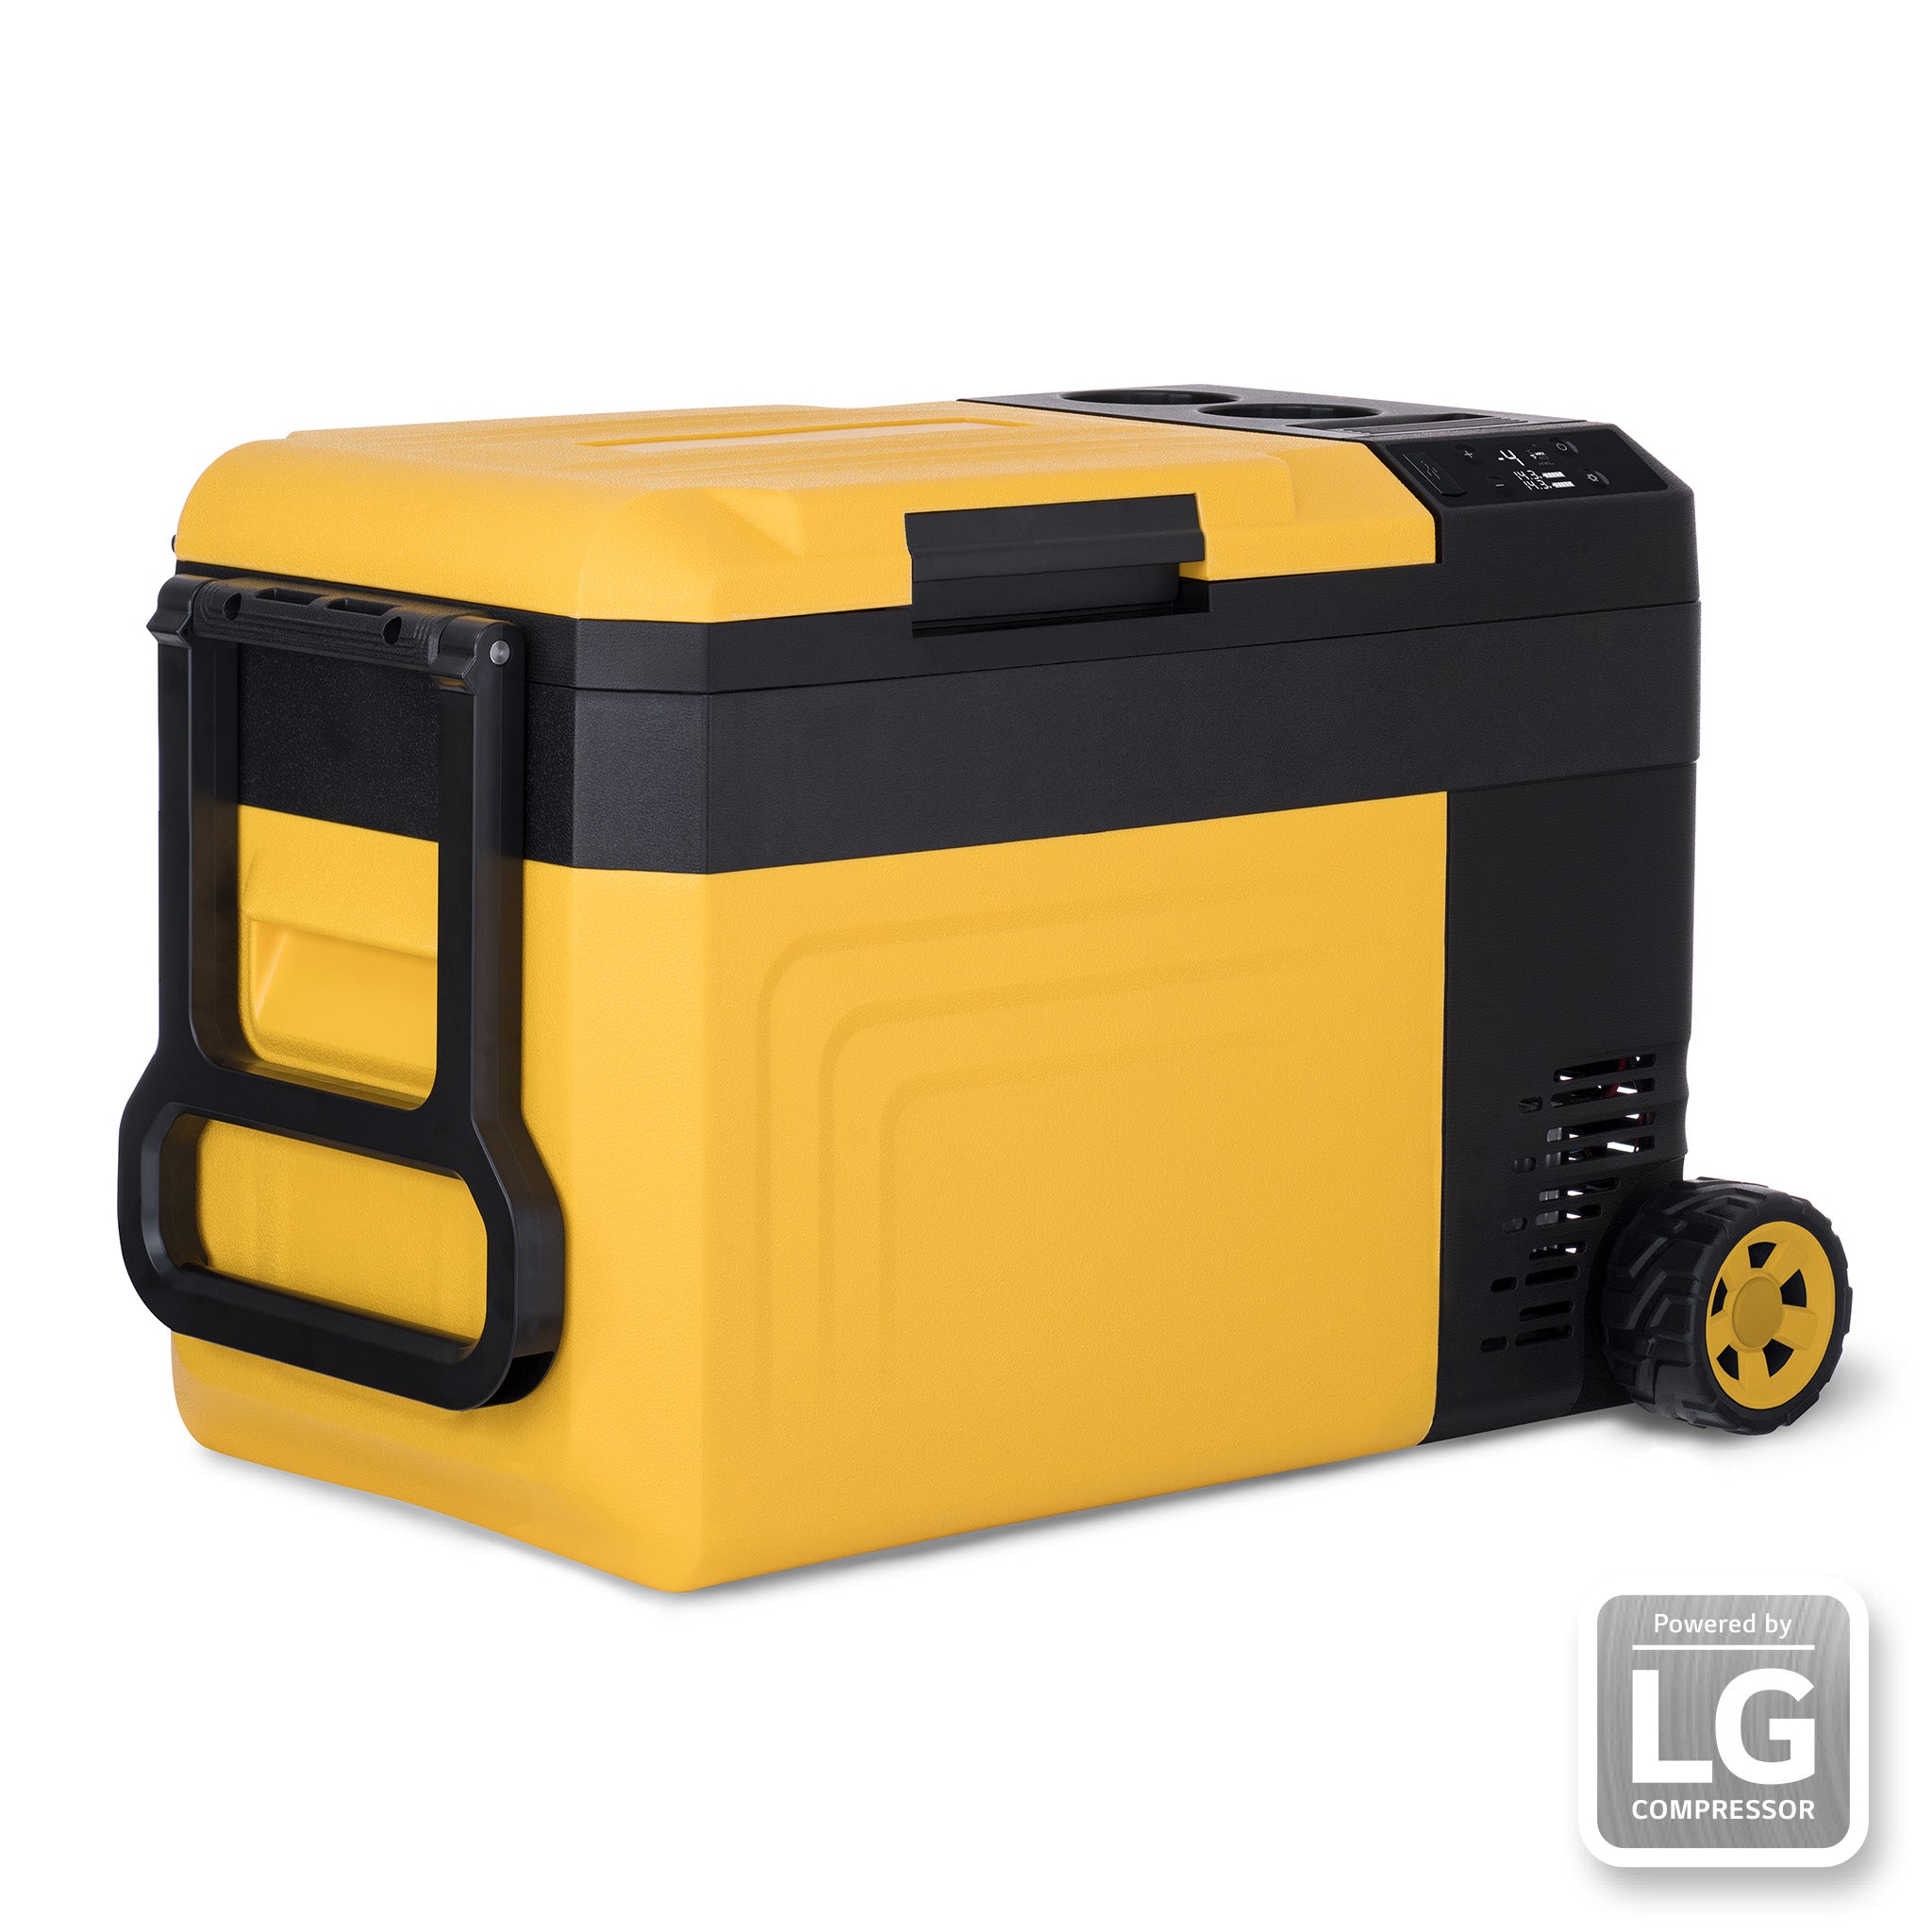 Stanley Camping Coolers & Ice Chests